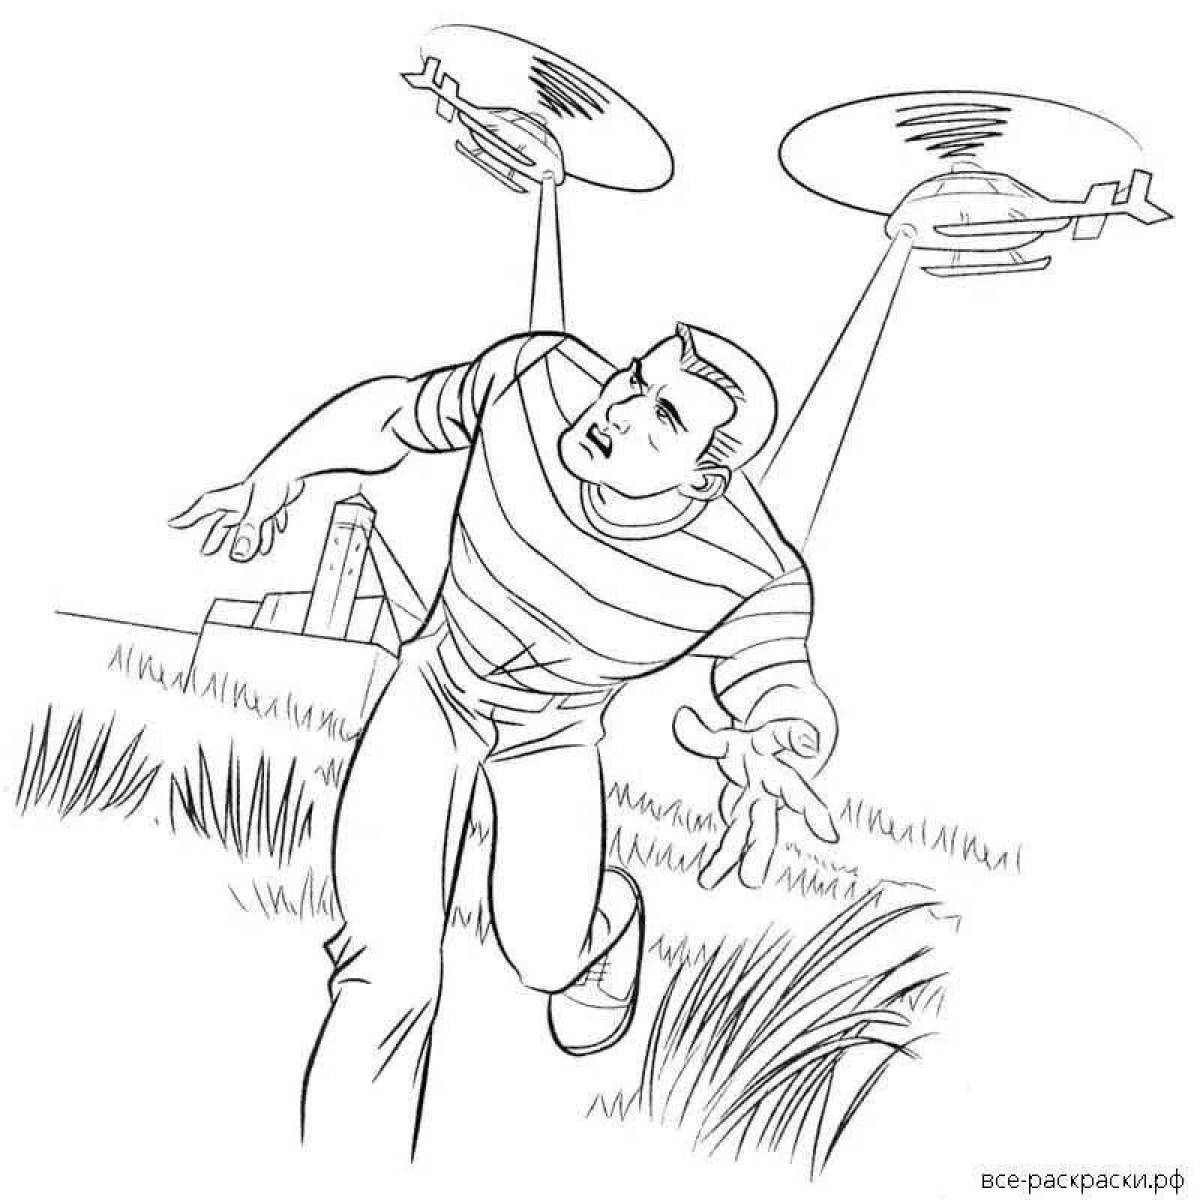 Glowing sand man coloring page